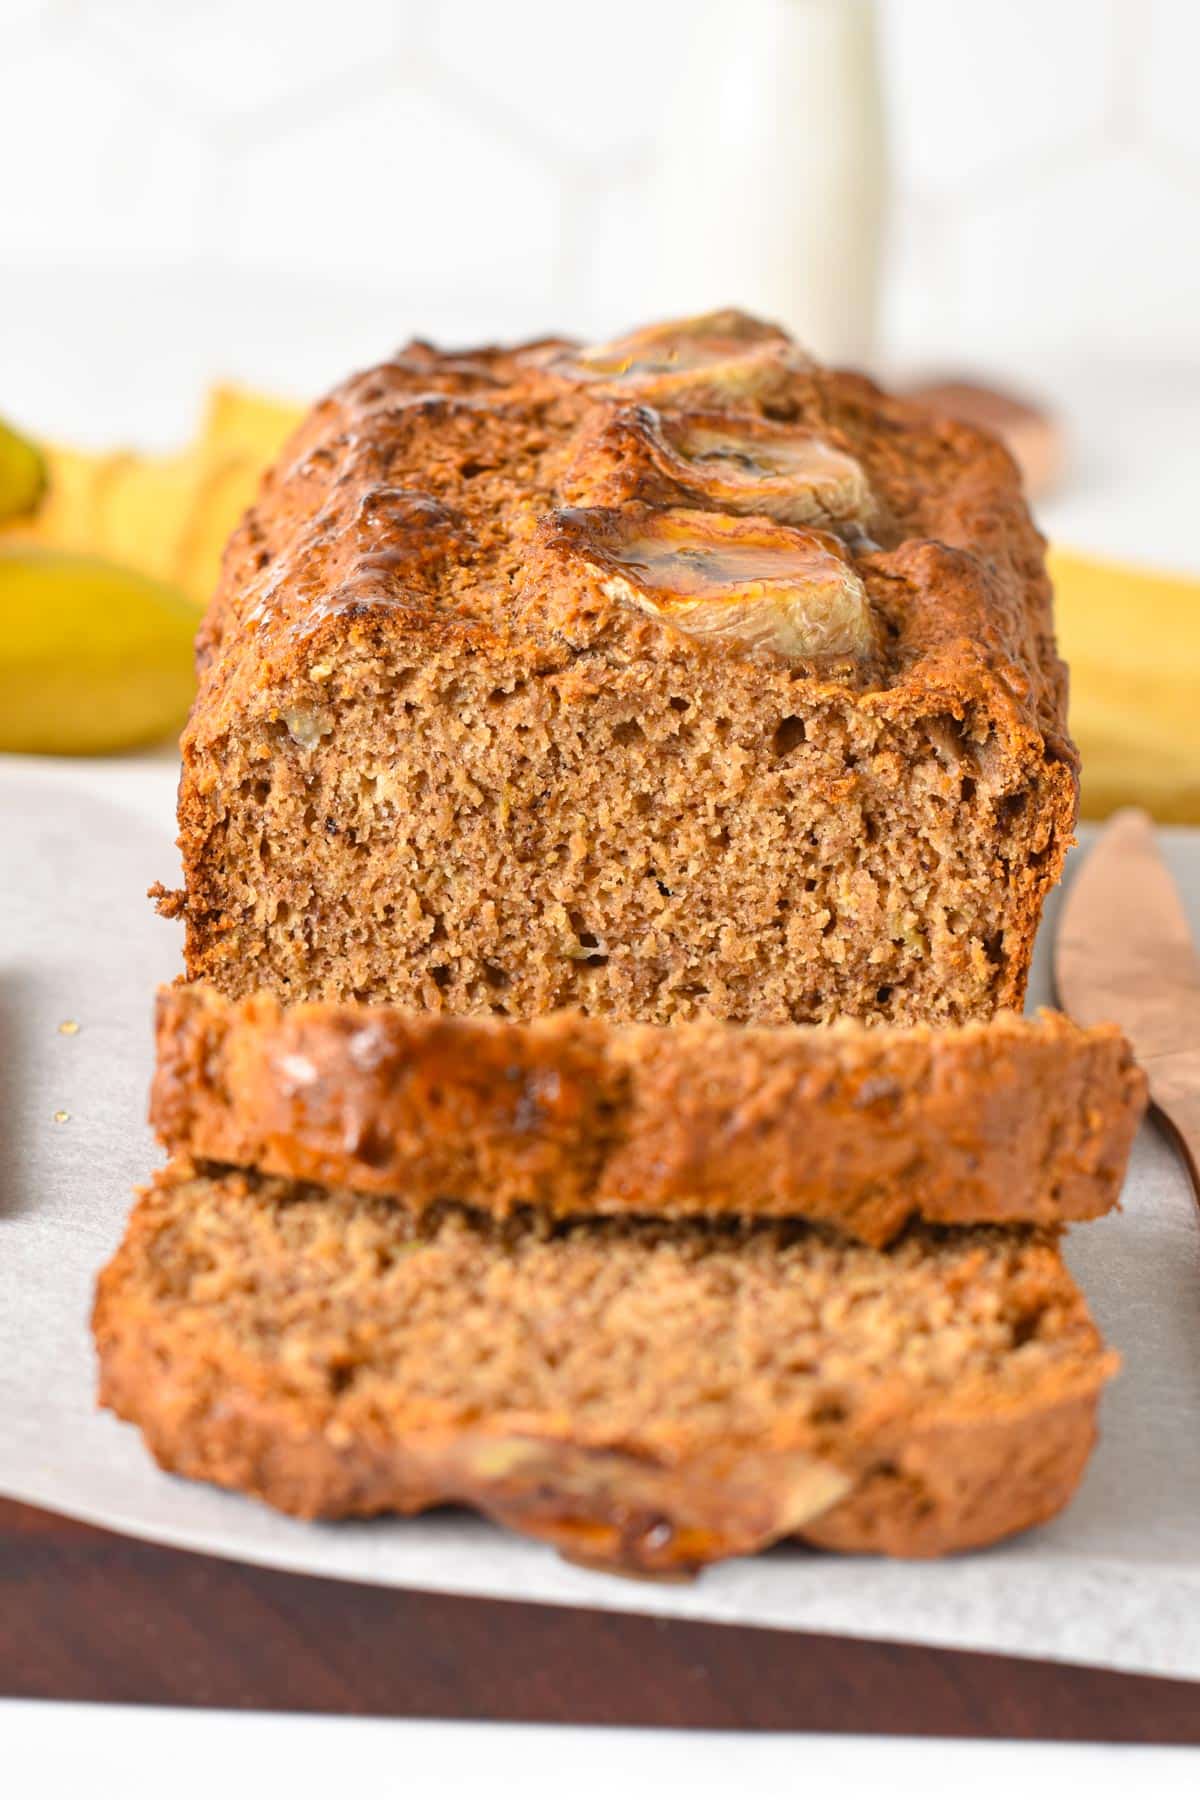 A slice of spelt banana bread in front of the full loaf.